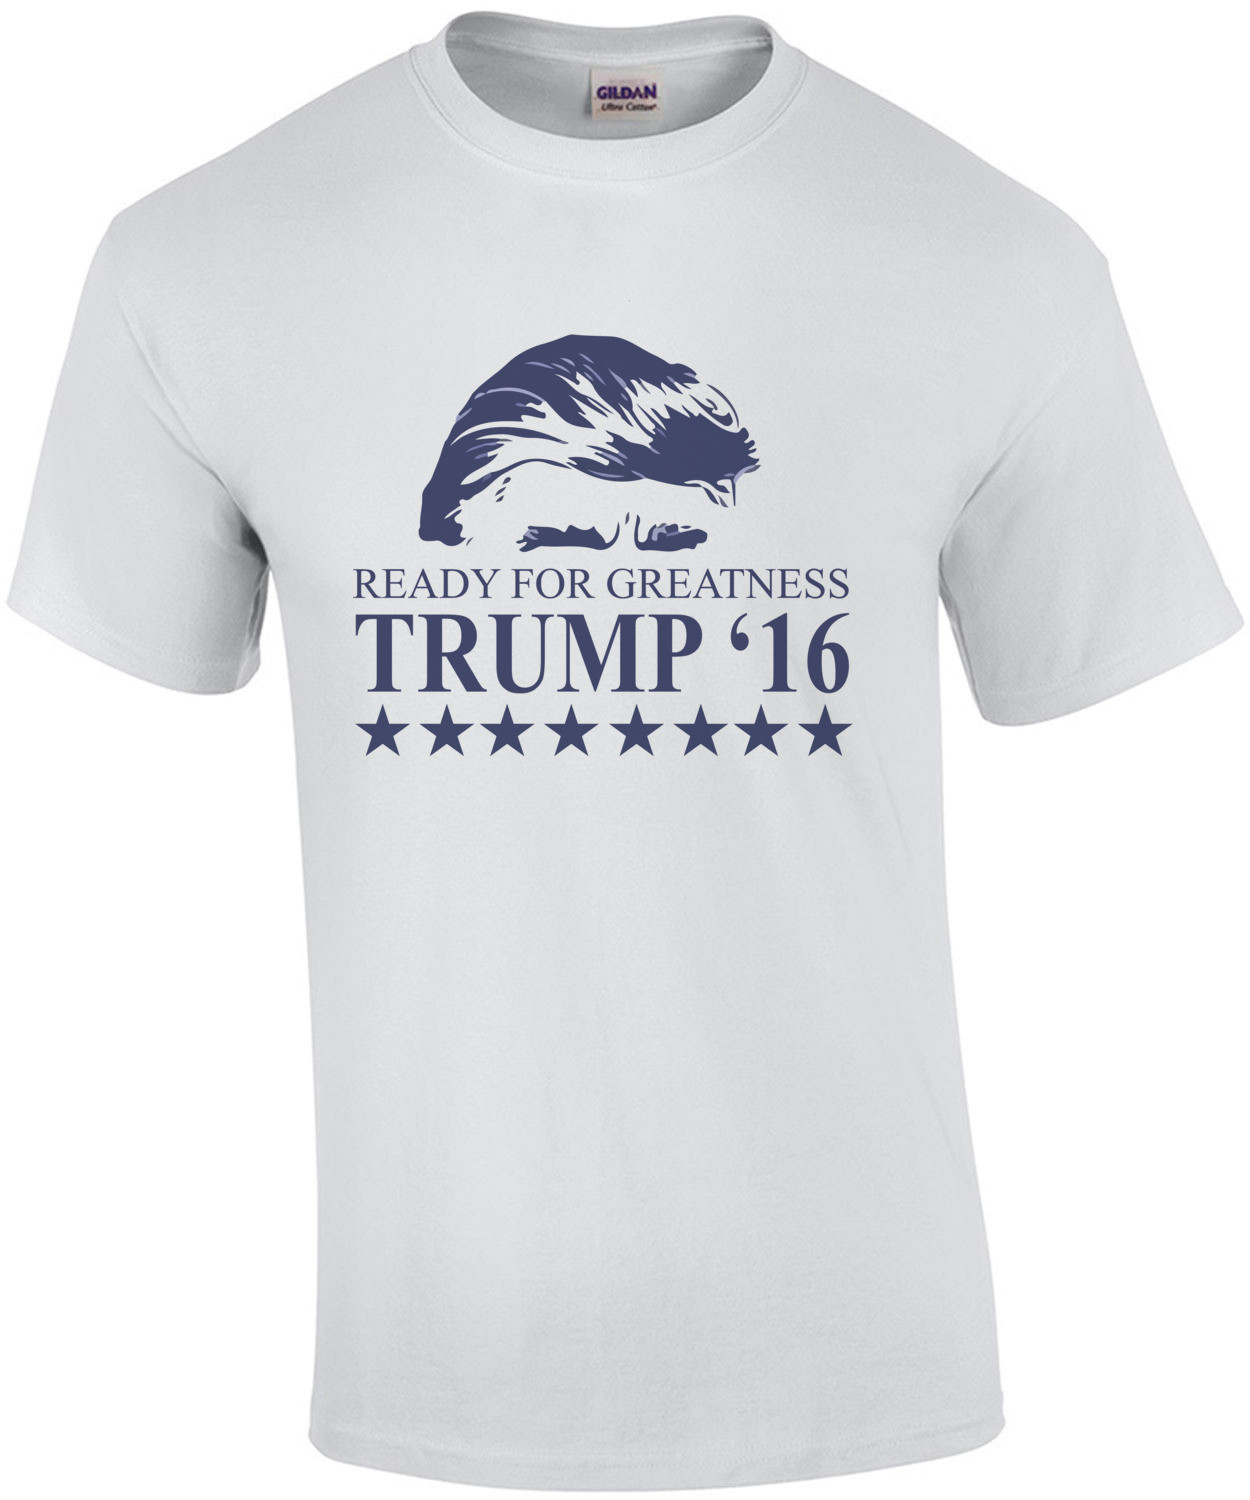 Ready for greatness Trump 16 - Trump T-Shirt